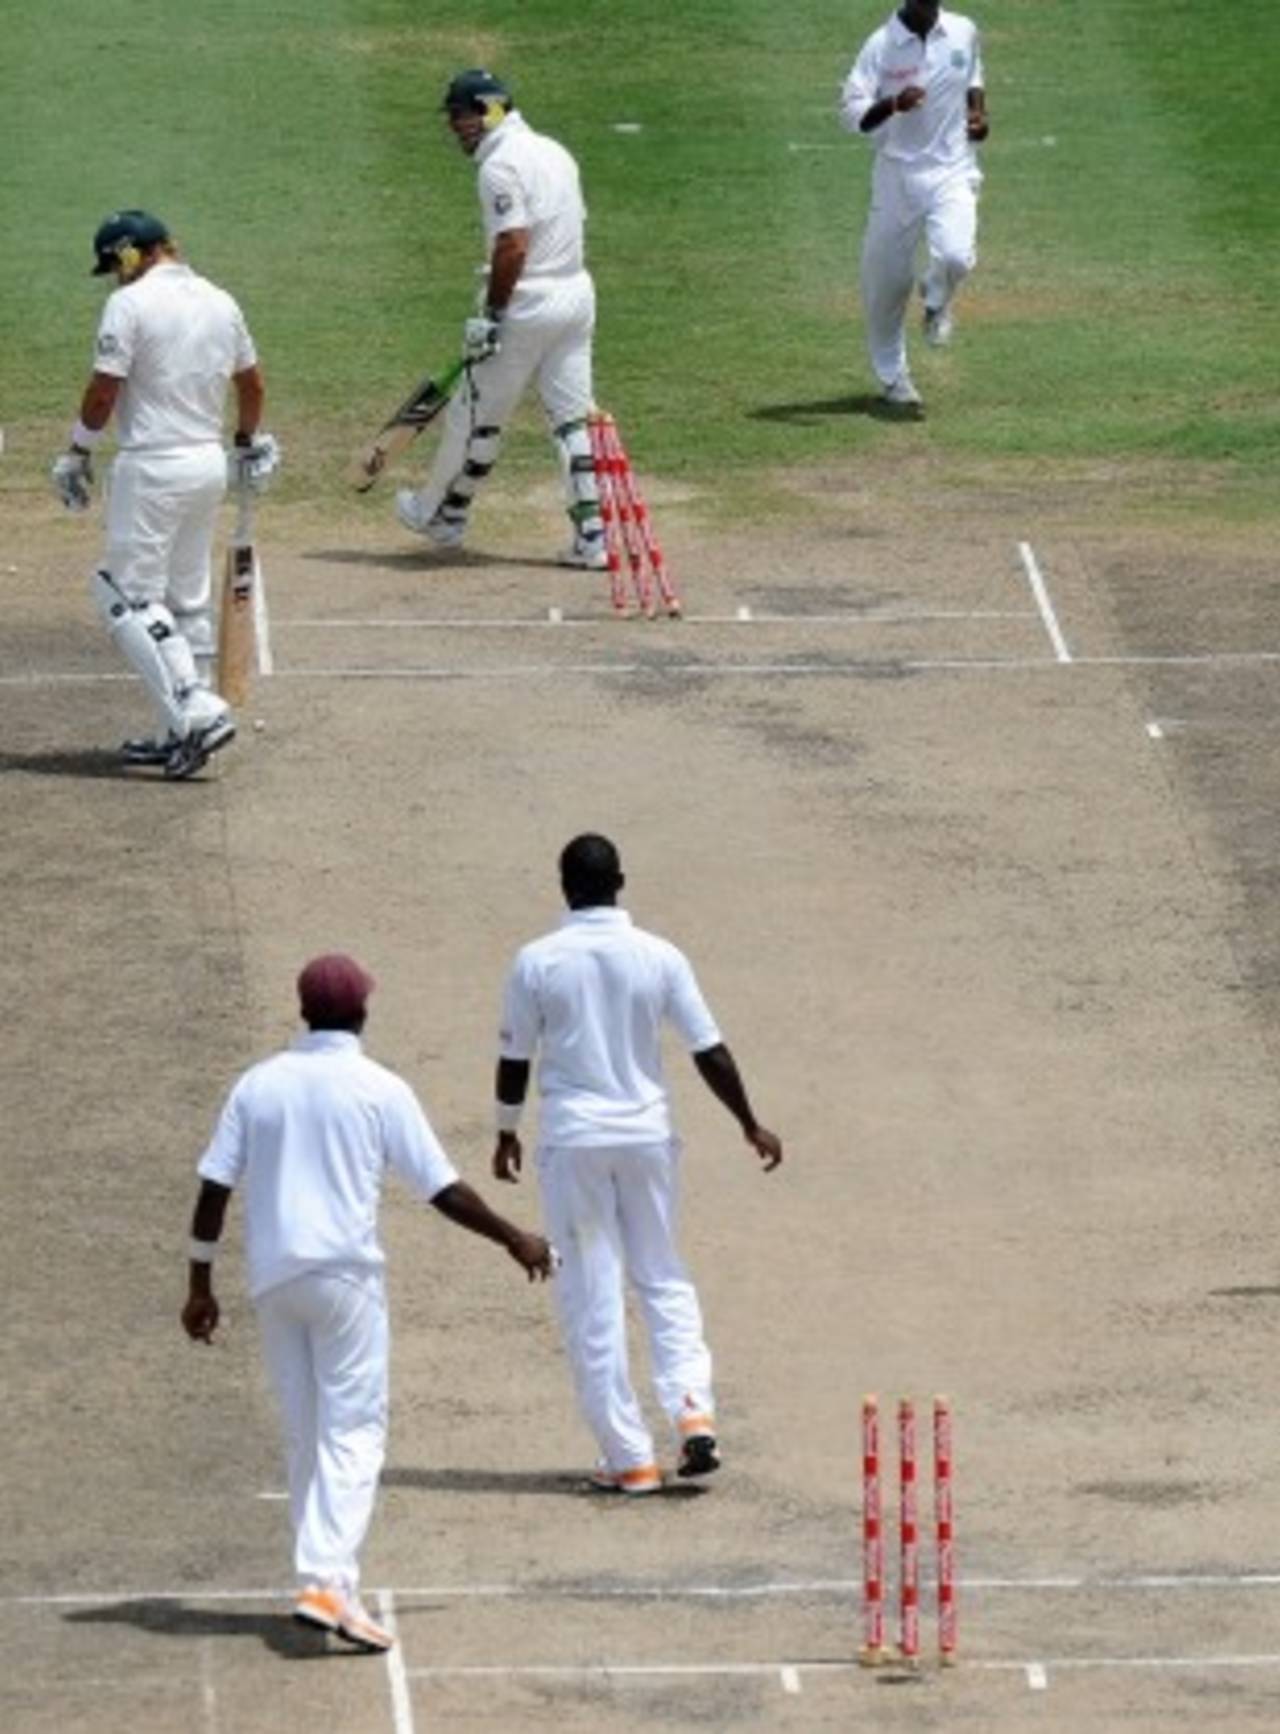 Ricky Ponting vents his frustration after being run out, West Indies v Australia, 1st Test, Barbados, 3rd day, April 9, 2012